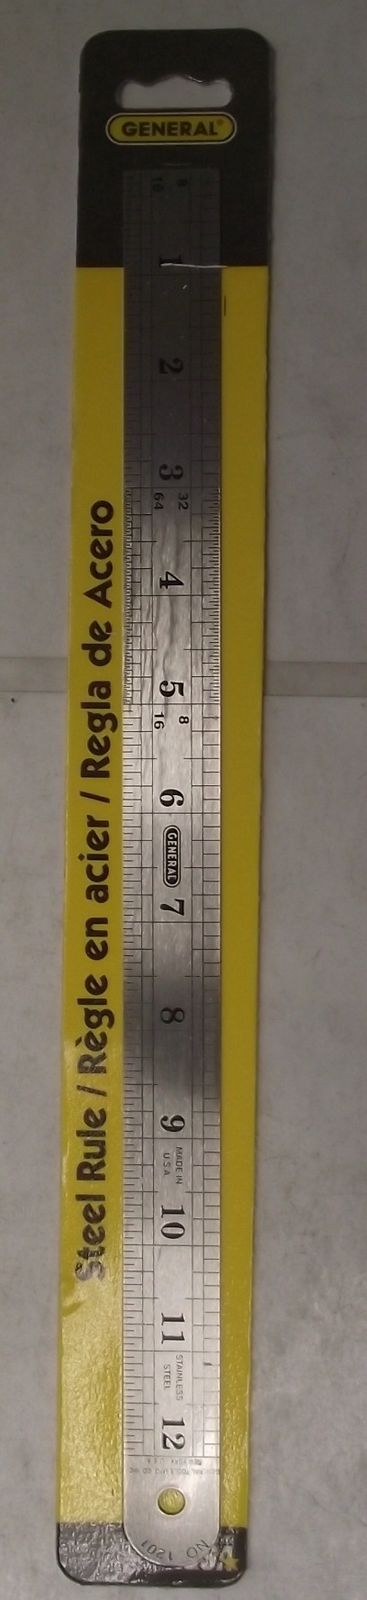 General Tools 1201 12" Stainless Steel Ruler USA